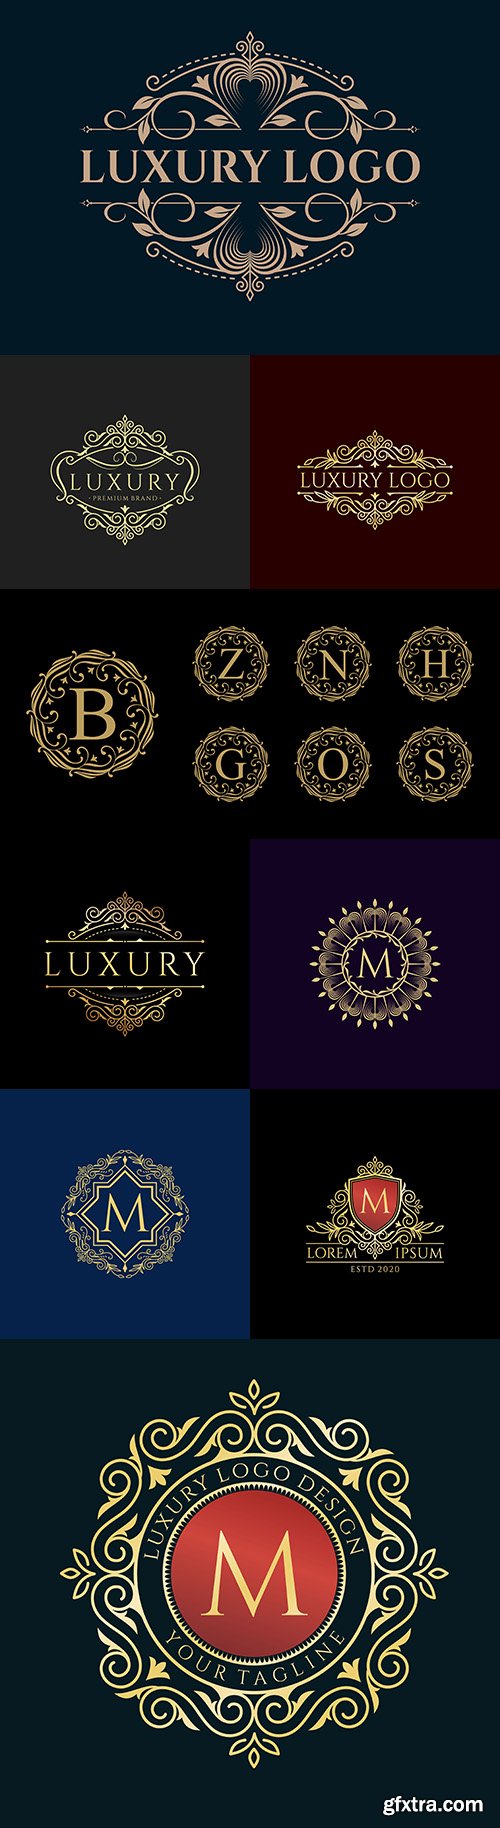 Letter and vintage luxurious logo collection design
